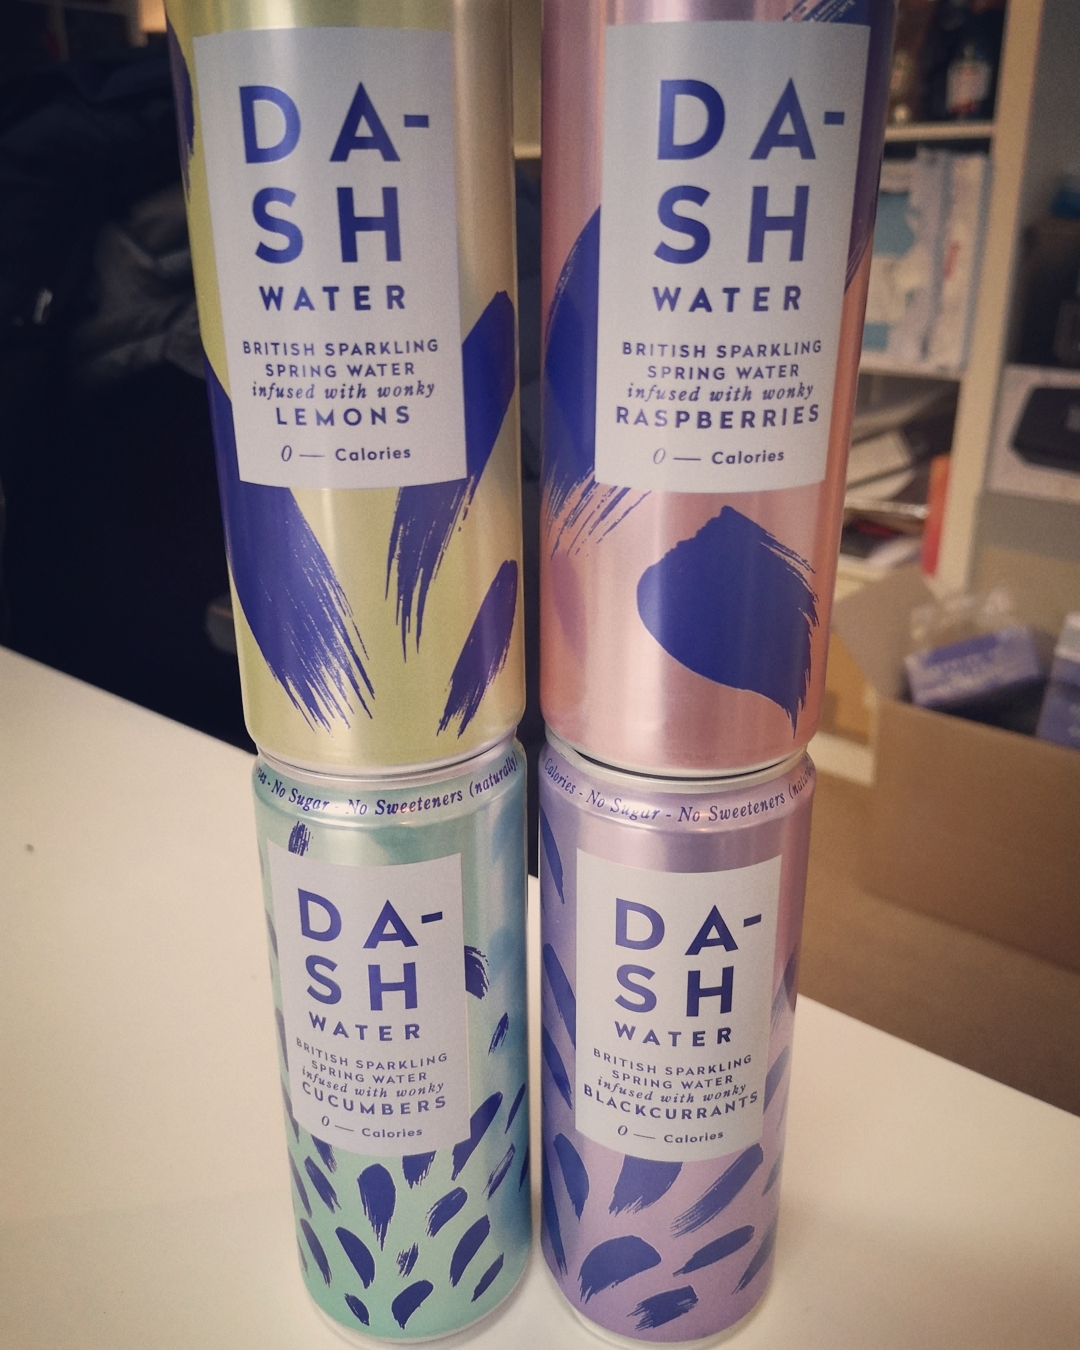 With no sugar or artificial sweeteners, all four @dashdrinks flavours are lined up to drink!

#ripdietdrinks #drinkdash